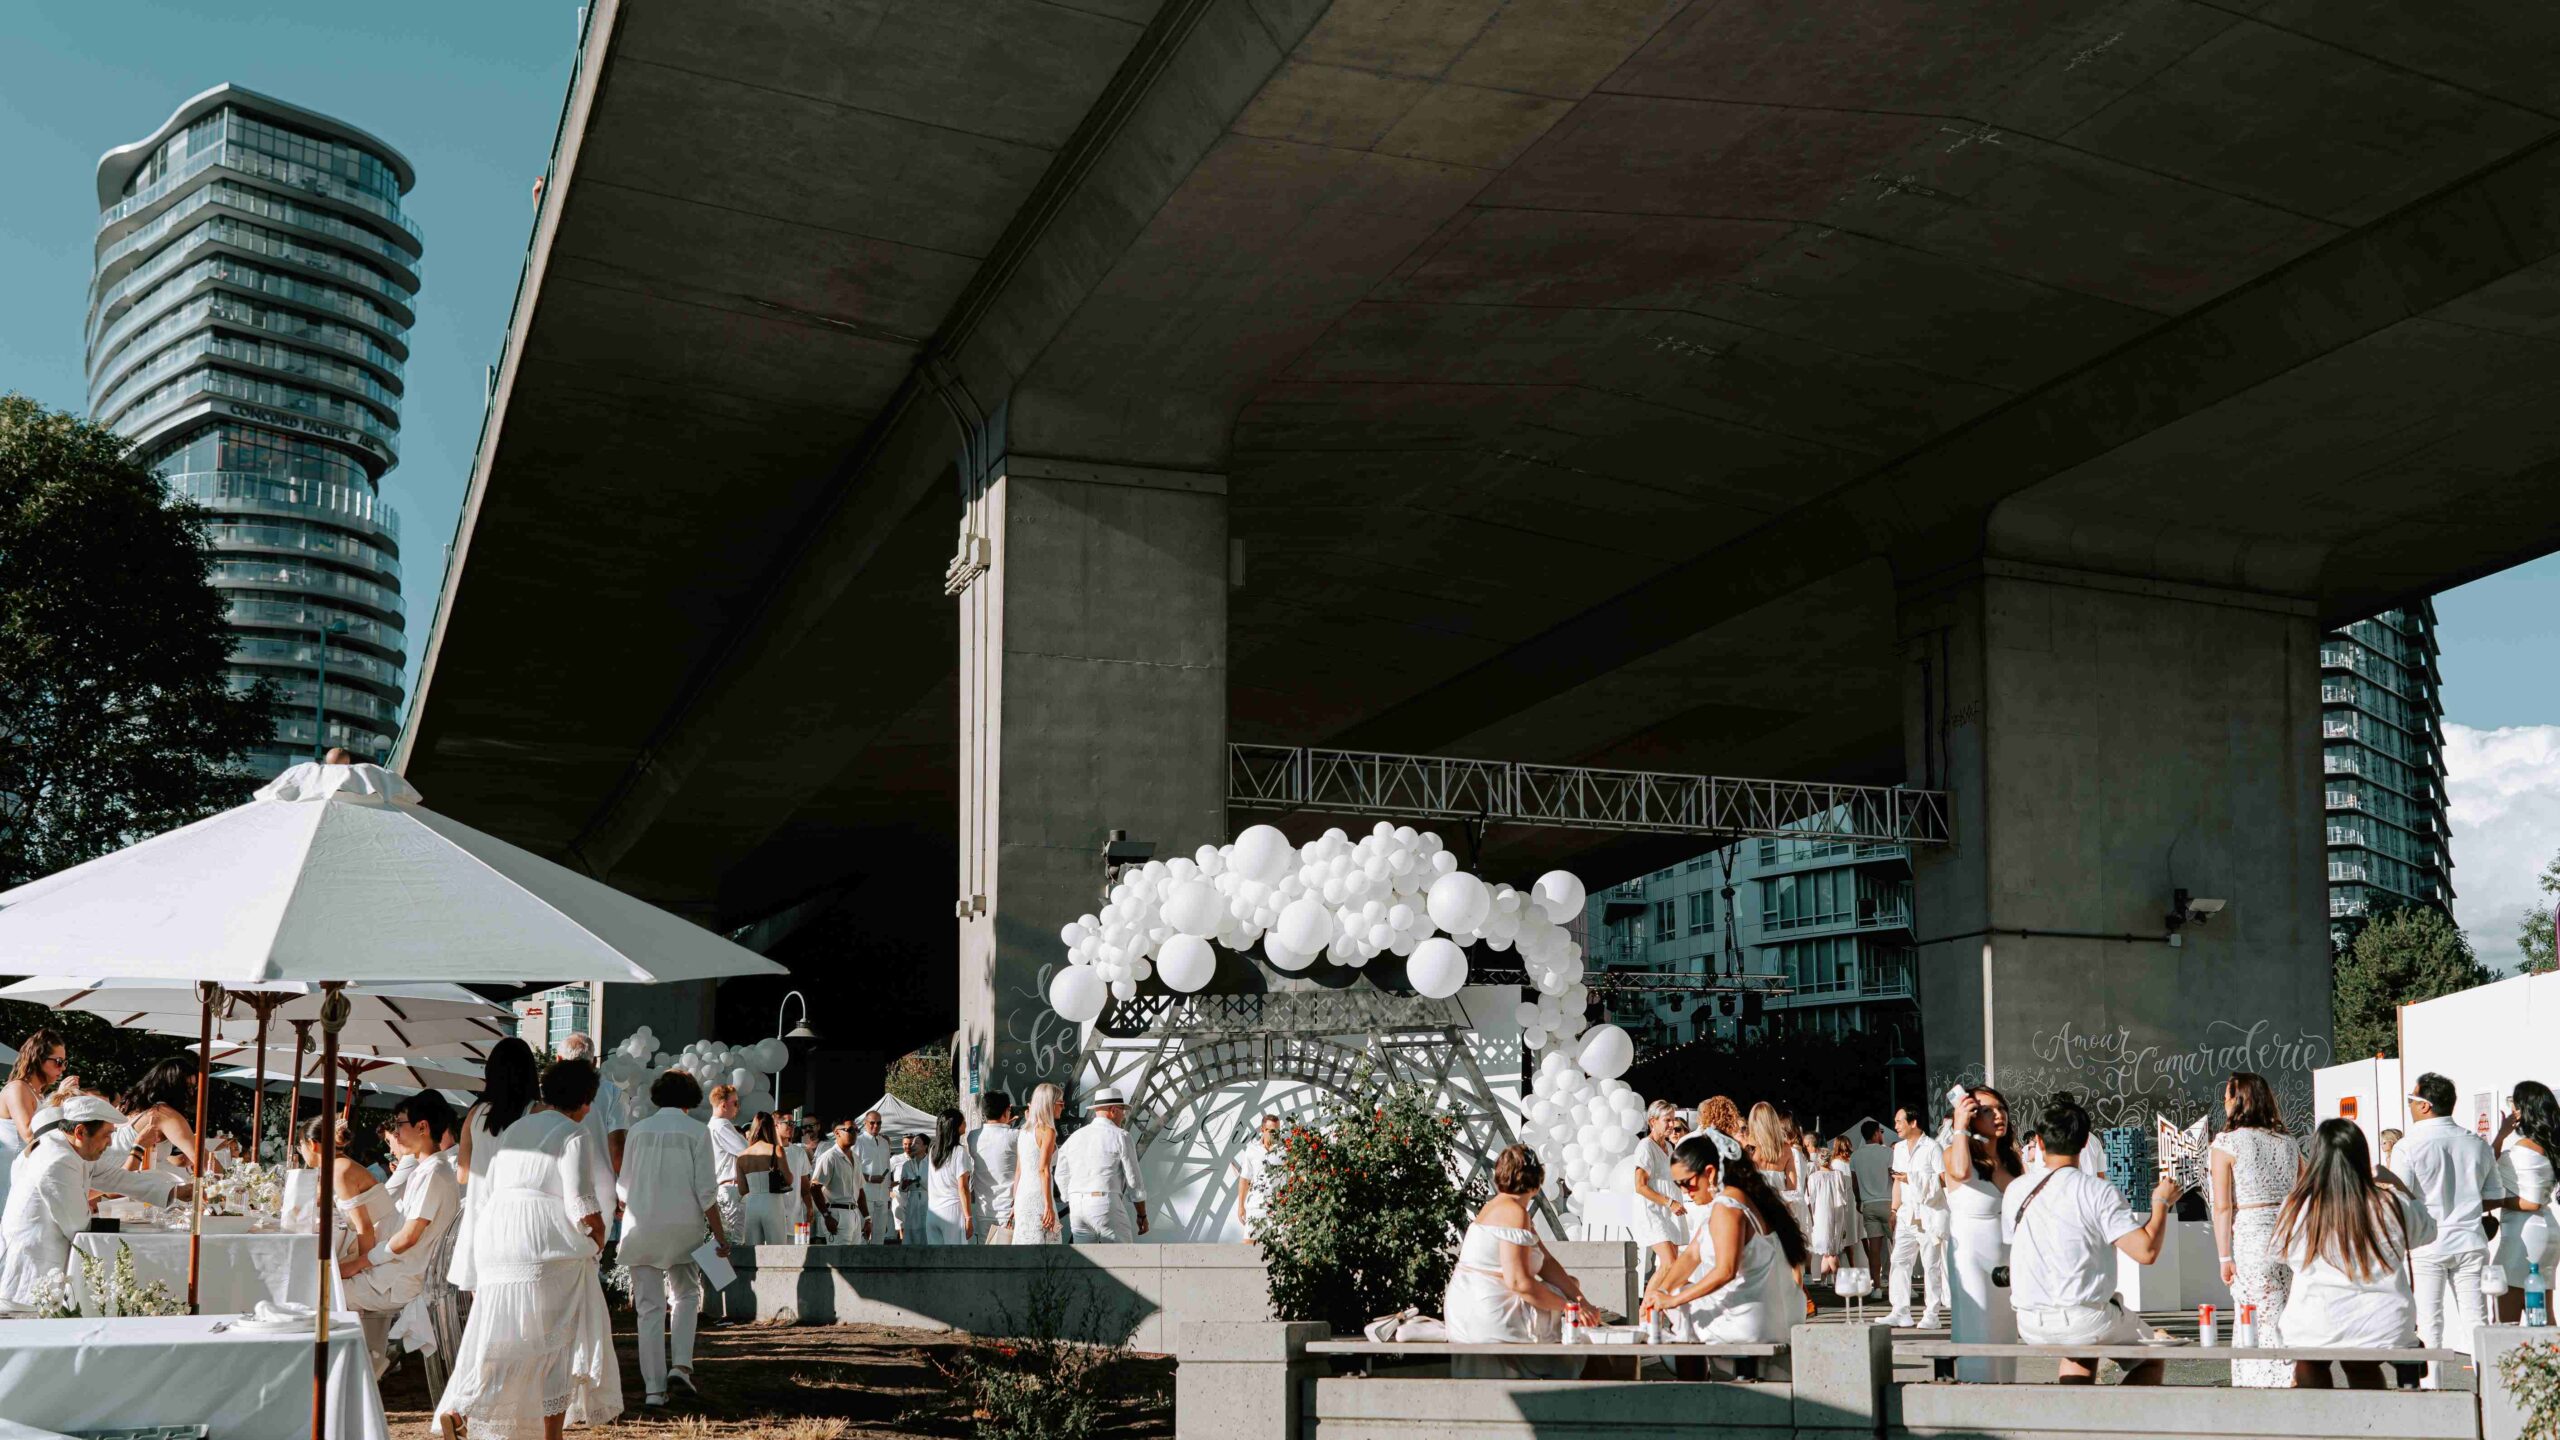 Concord Pacific's Coopers' Park and Quayside Marina Diner en Blanc